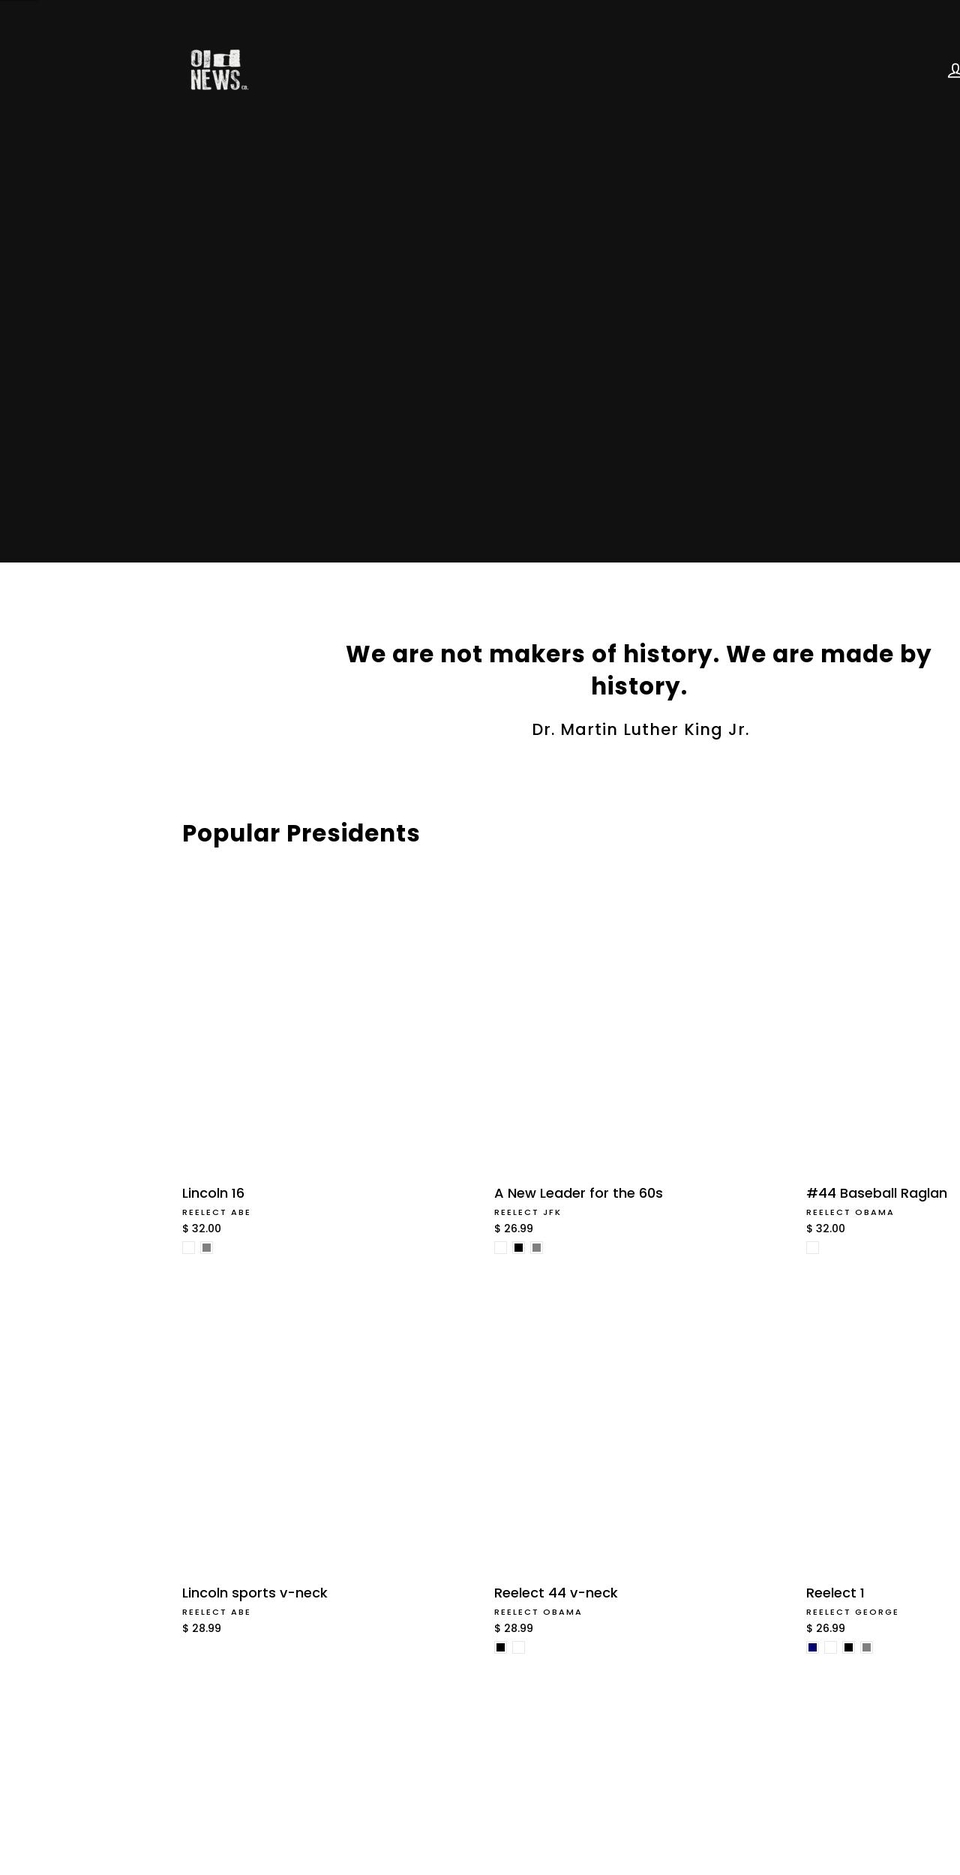 Updated Motion Shopify theme site example shopthepresidents.com